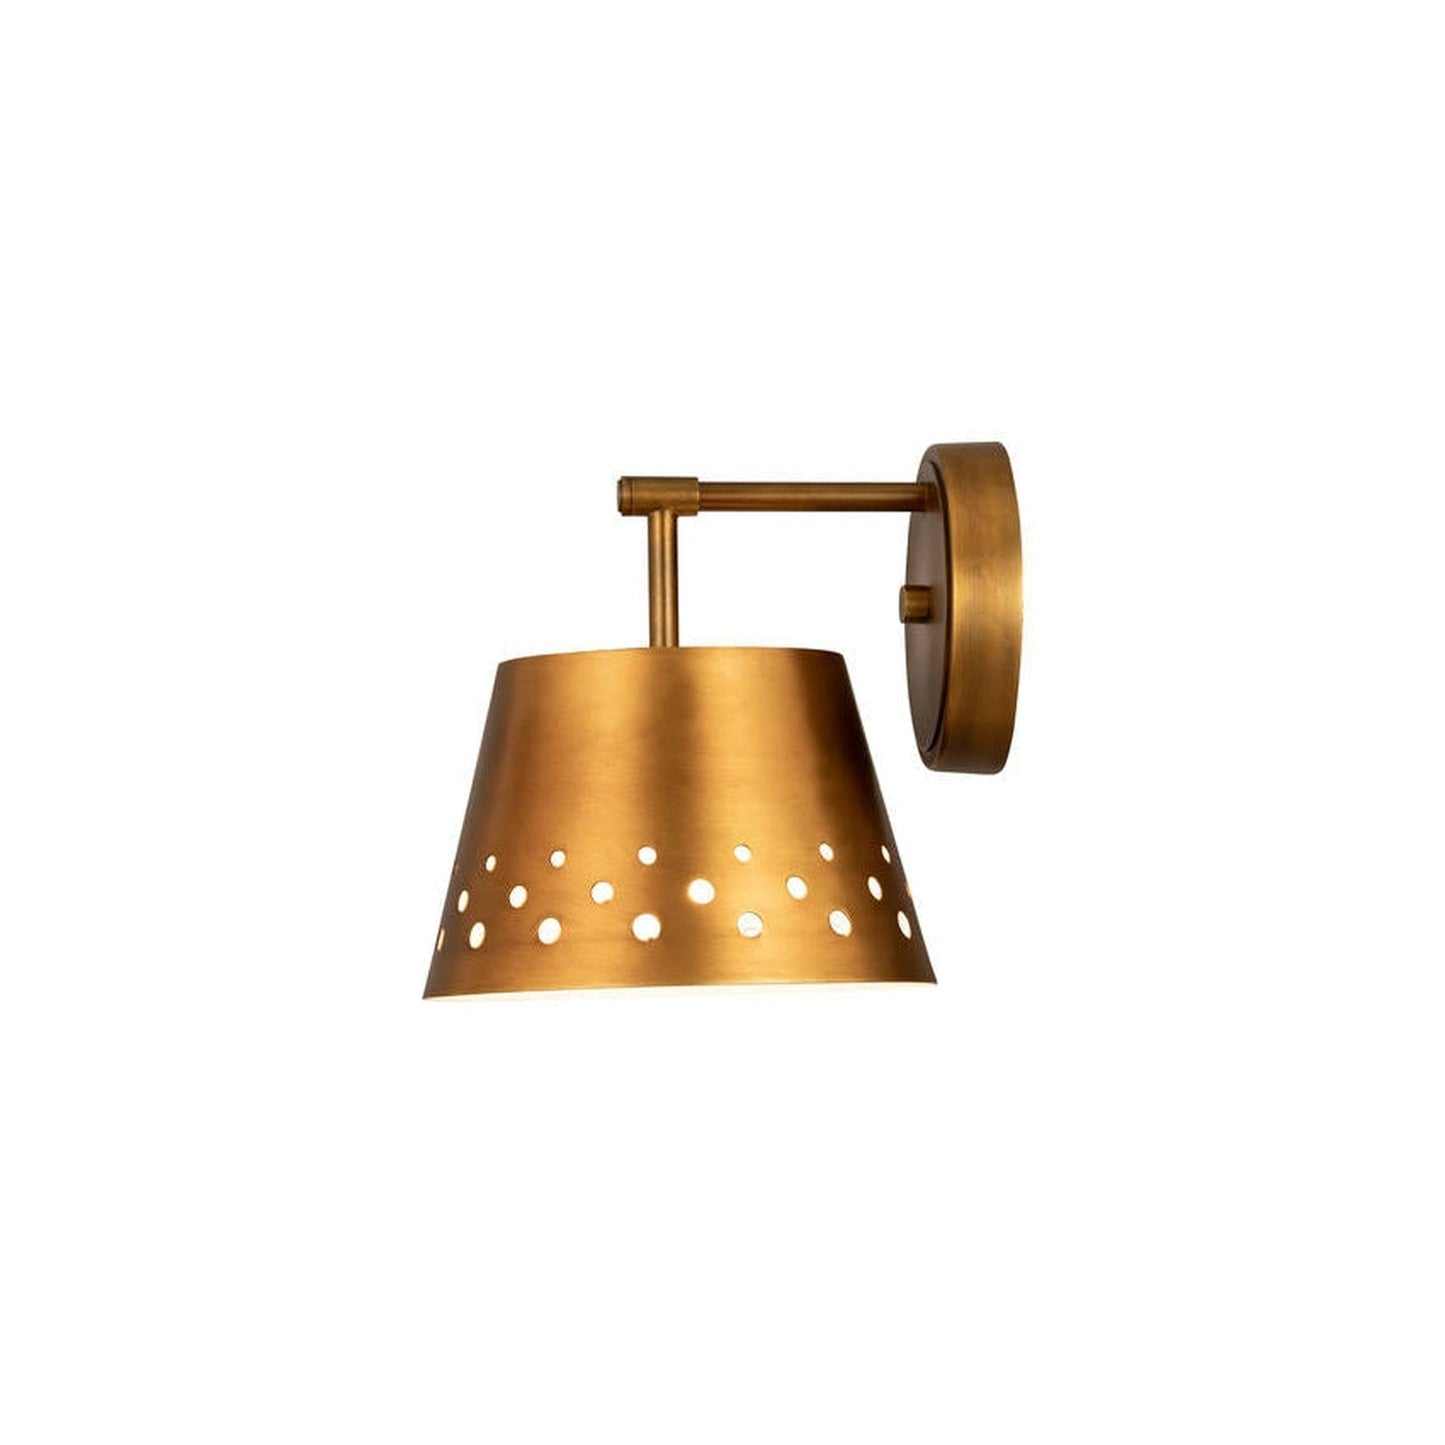 Z-Lite Katie 8" 1-Light Rubbed Brass Wall Sconce With Iron Rubbed Brass Shade